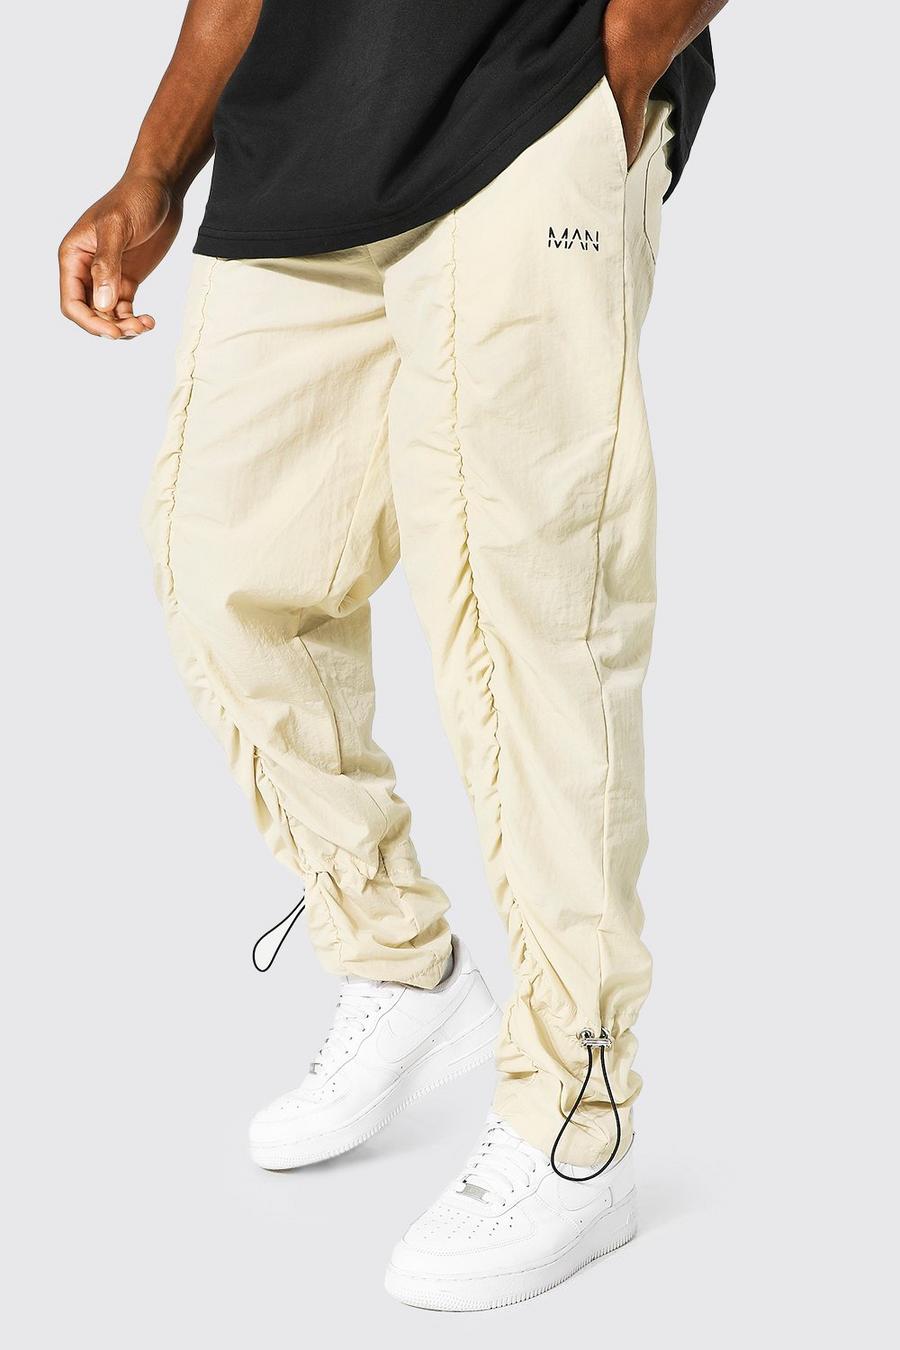 Pantaloni Man dritti in tessuto Shell con ruches, Stone beige image number 1